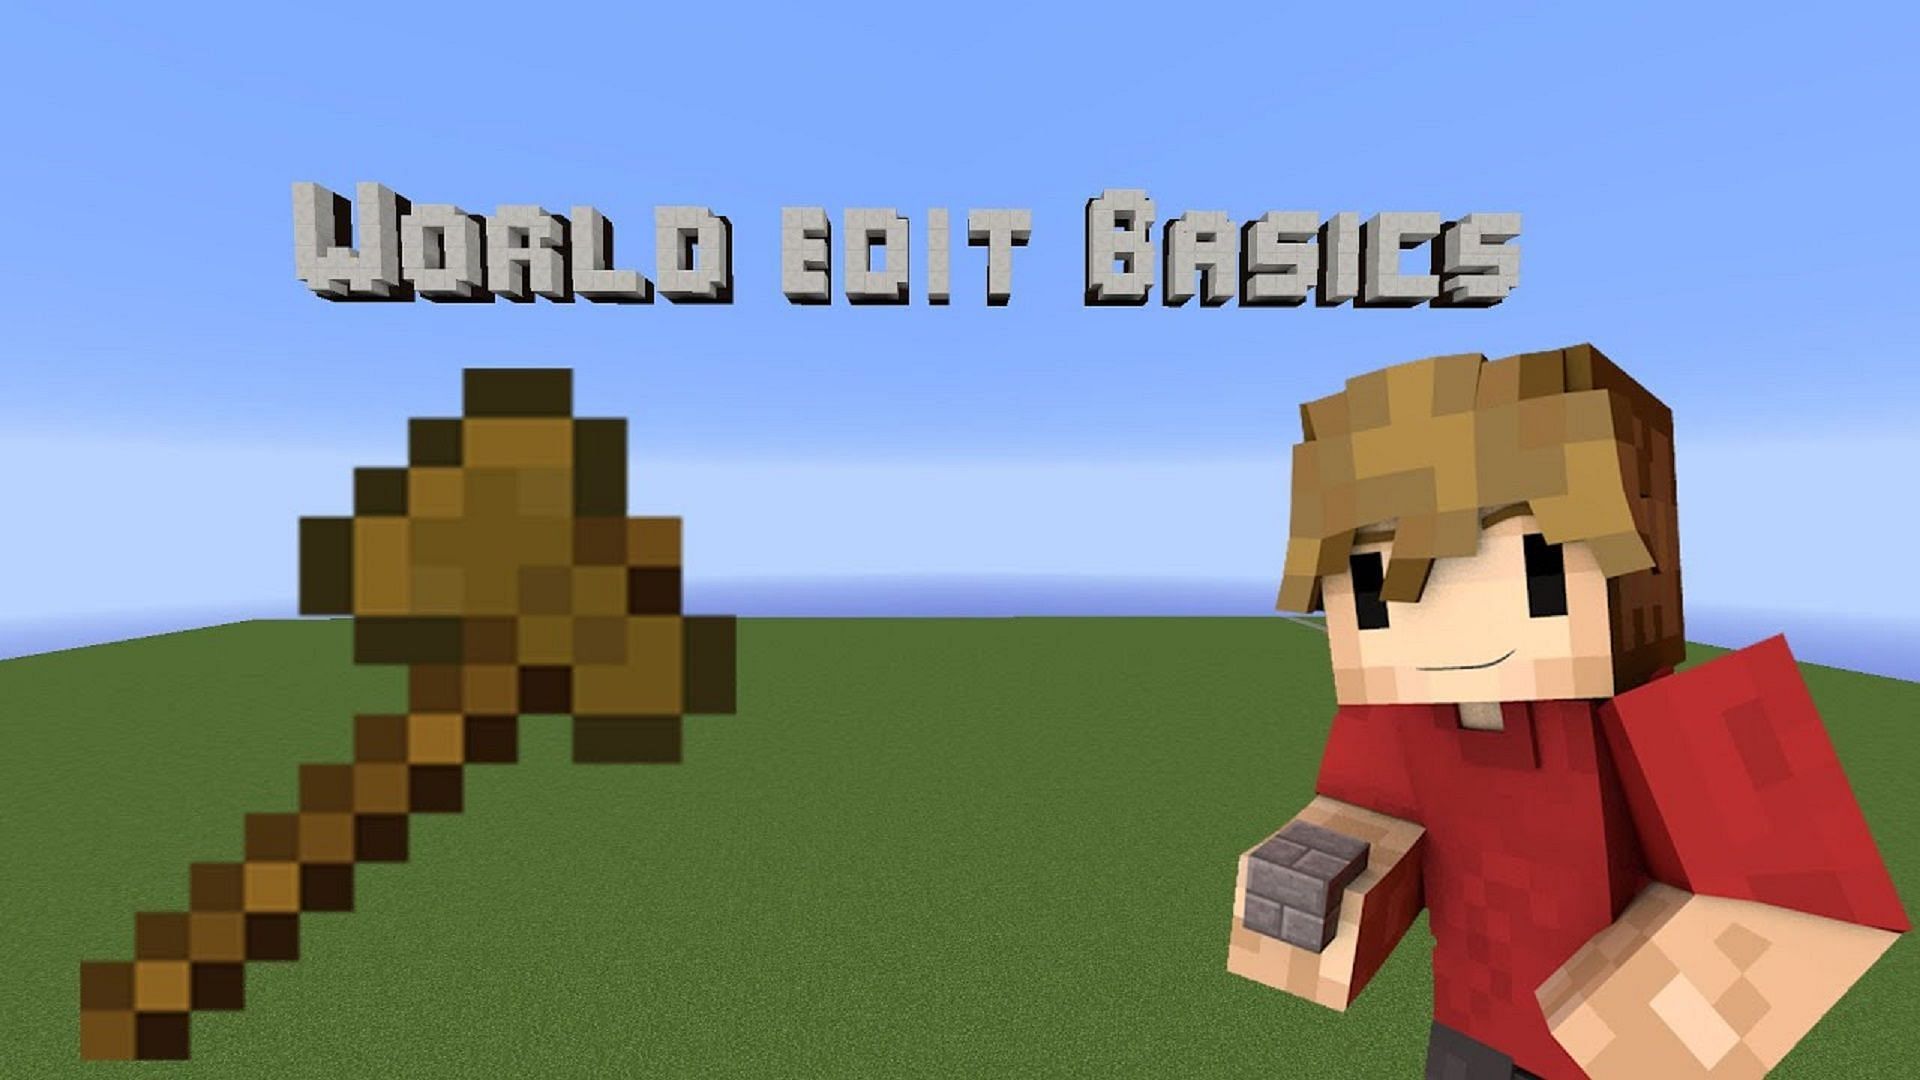 WorldEdit can create structures in just a few clicks and commands (Image via Grian/YouTube)